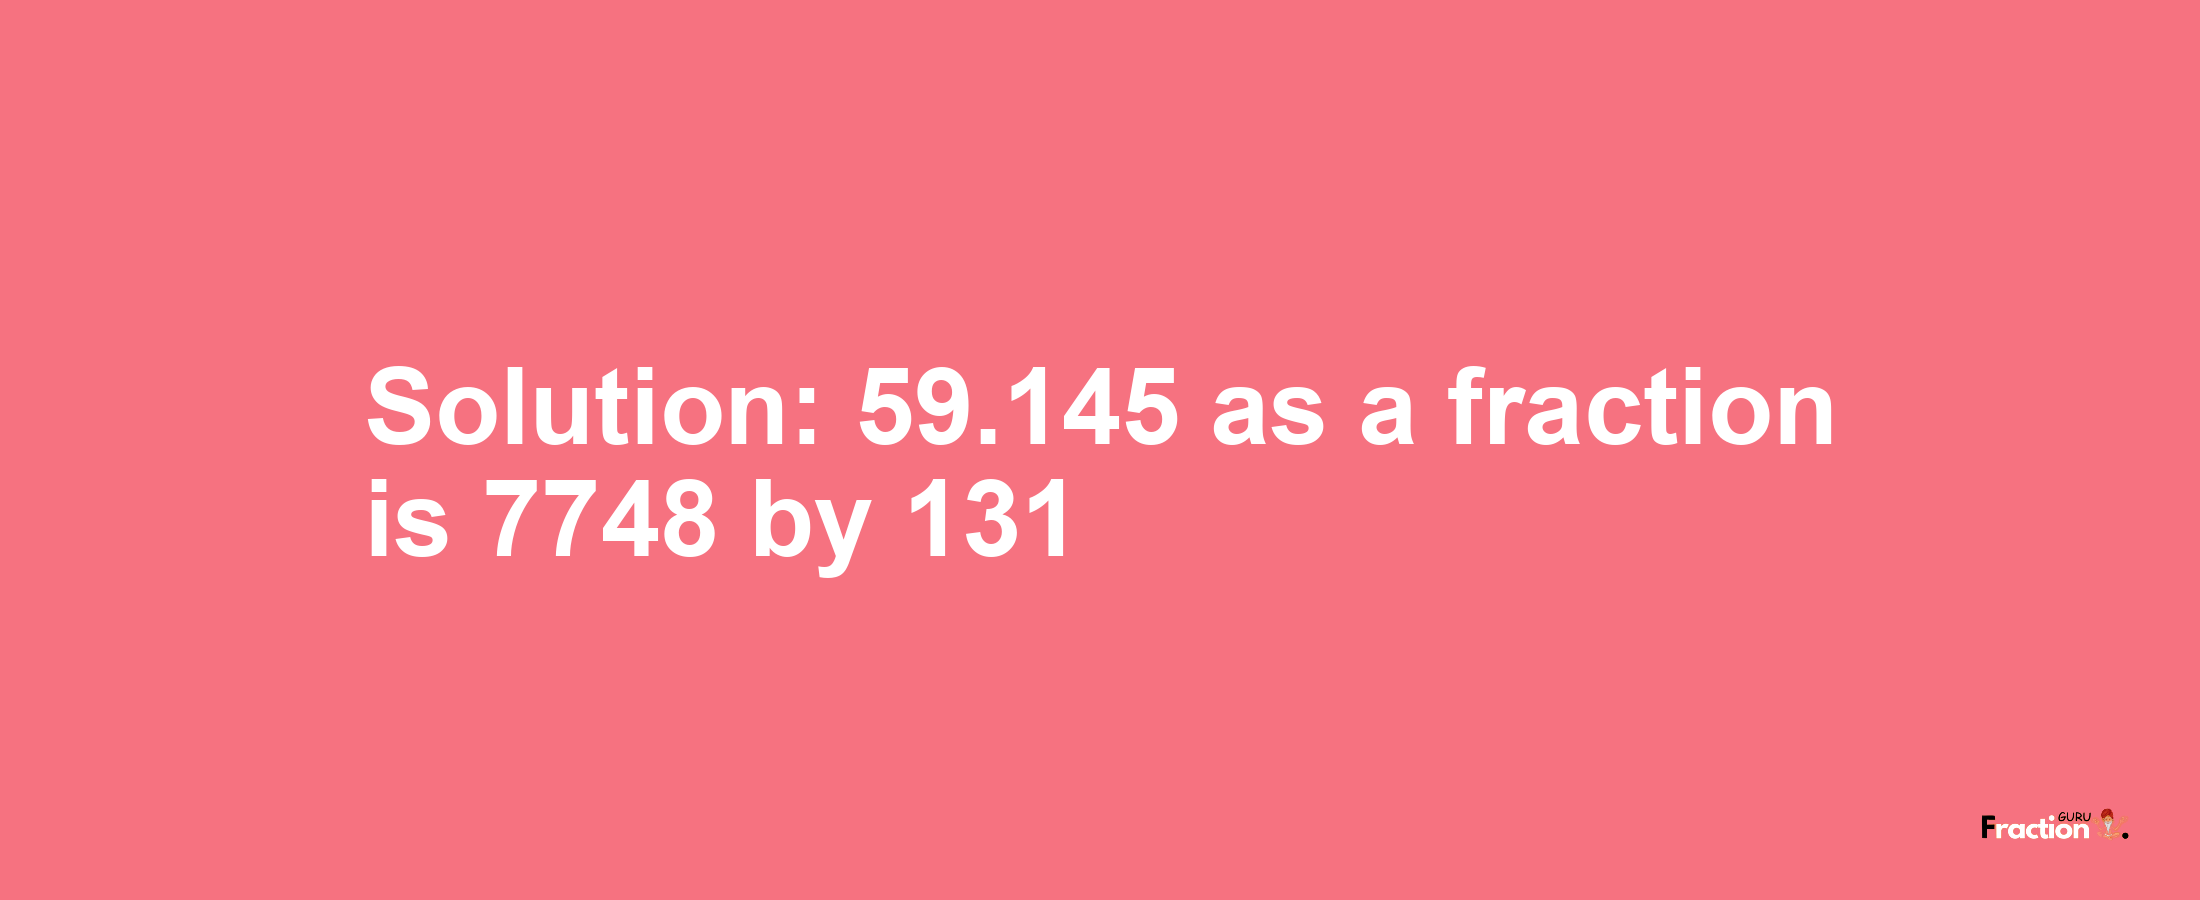 Solution:59.145 as a fraction is 7748/131